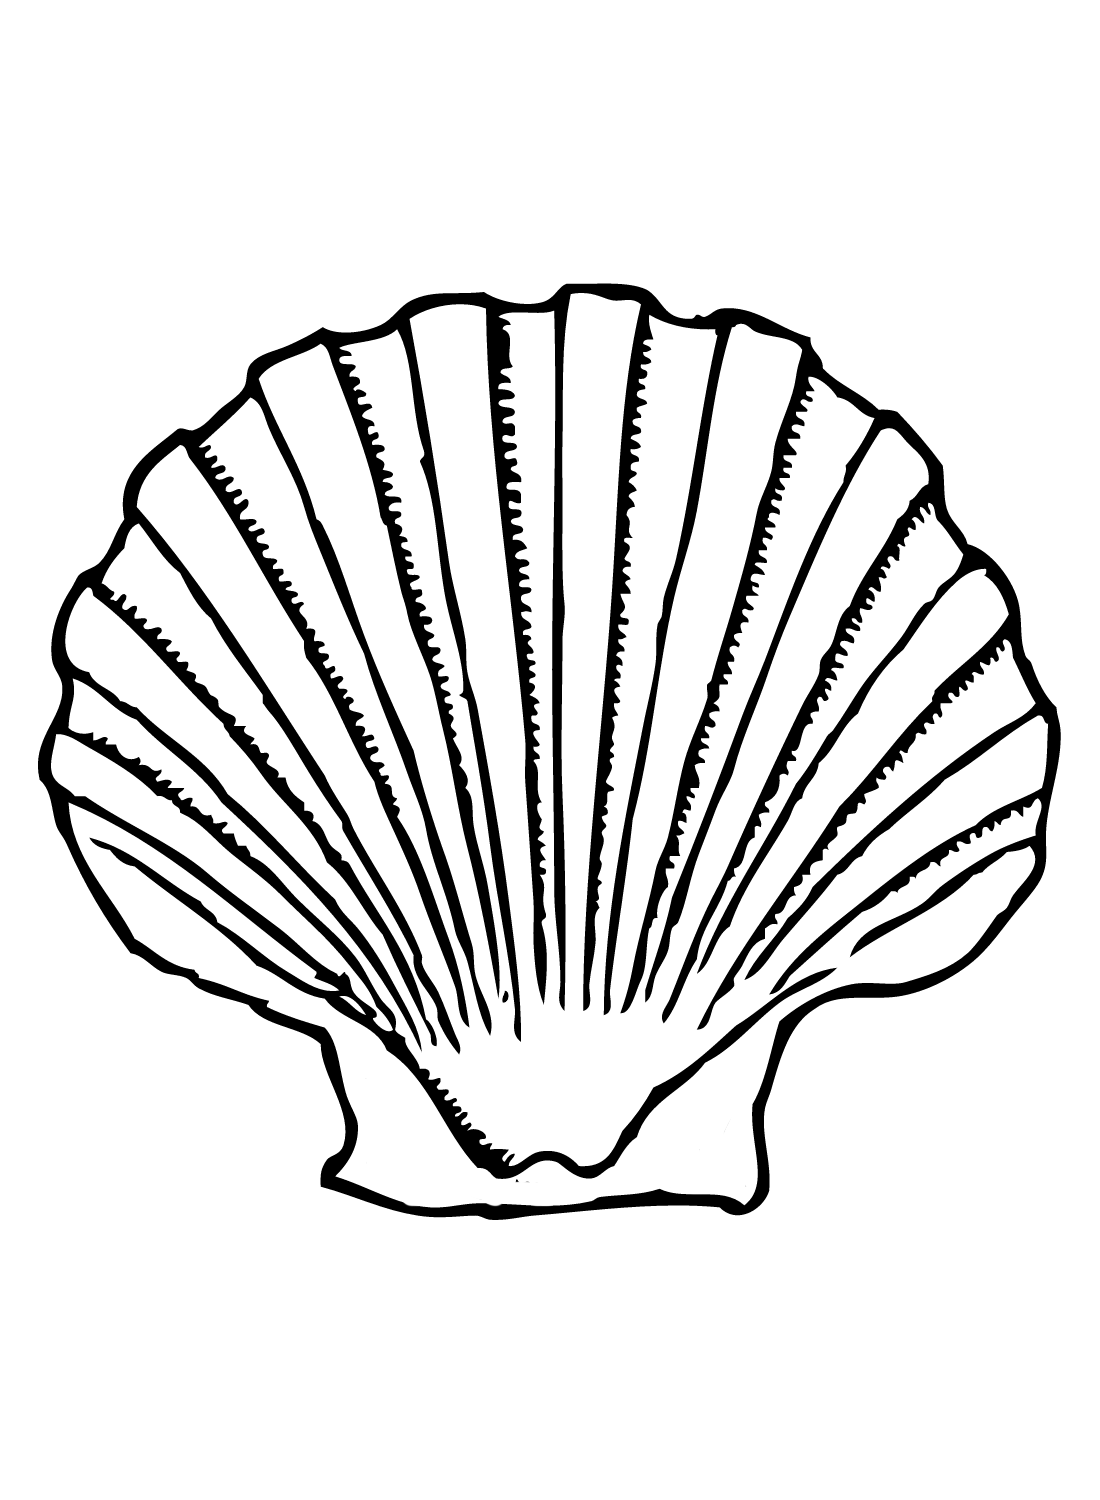 Scallop Shells Coloring Page